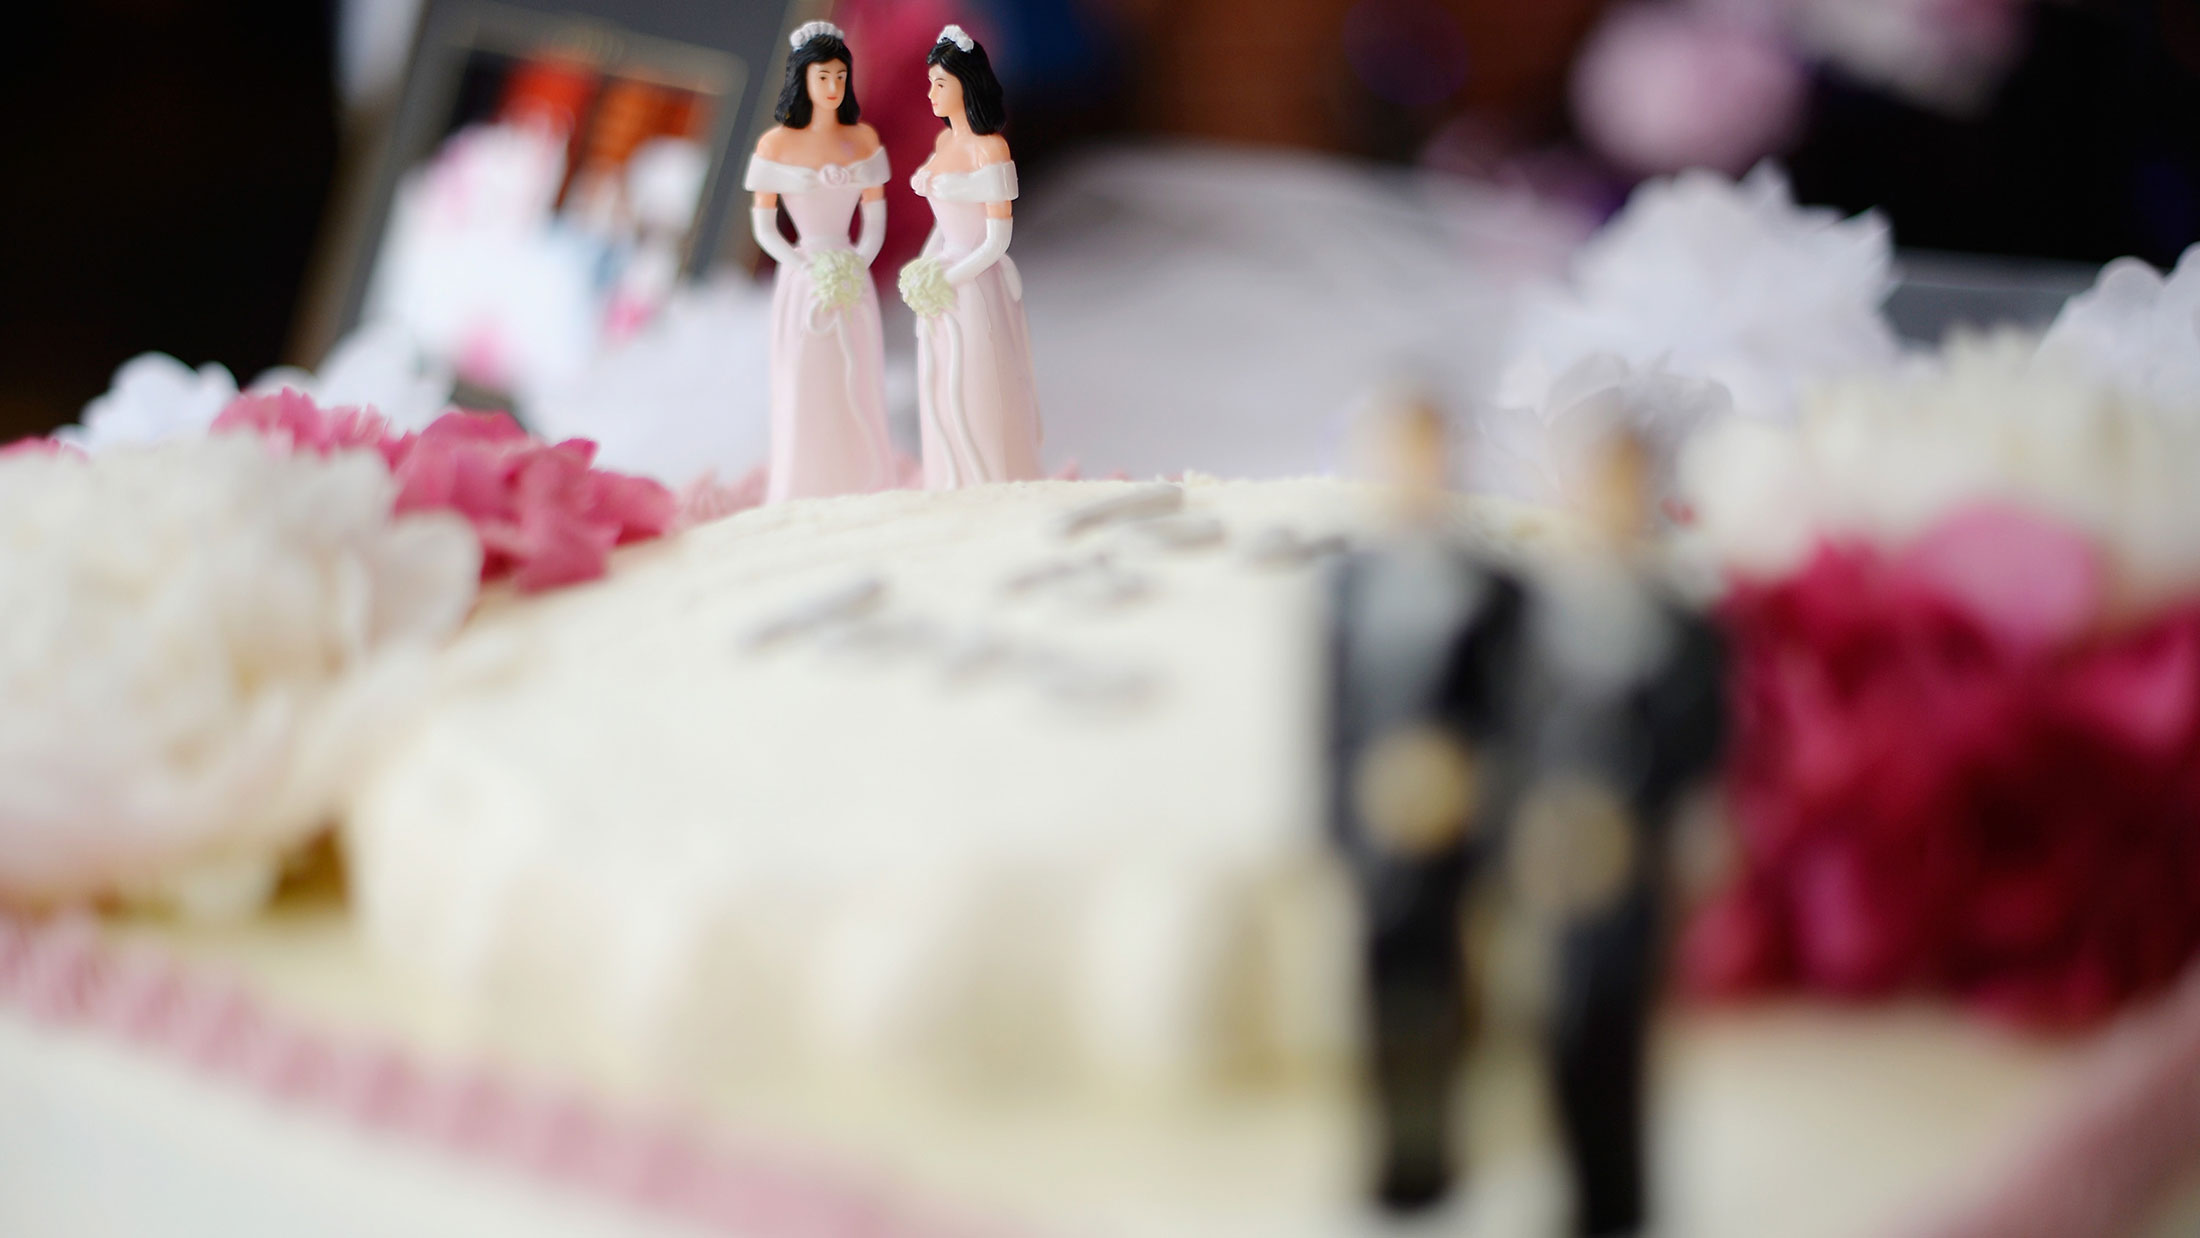 Gay cake case: 'The objection was to the message, not the messenger'